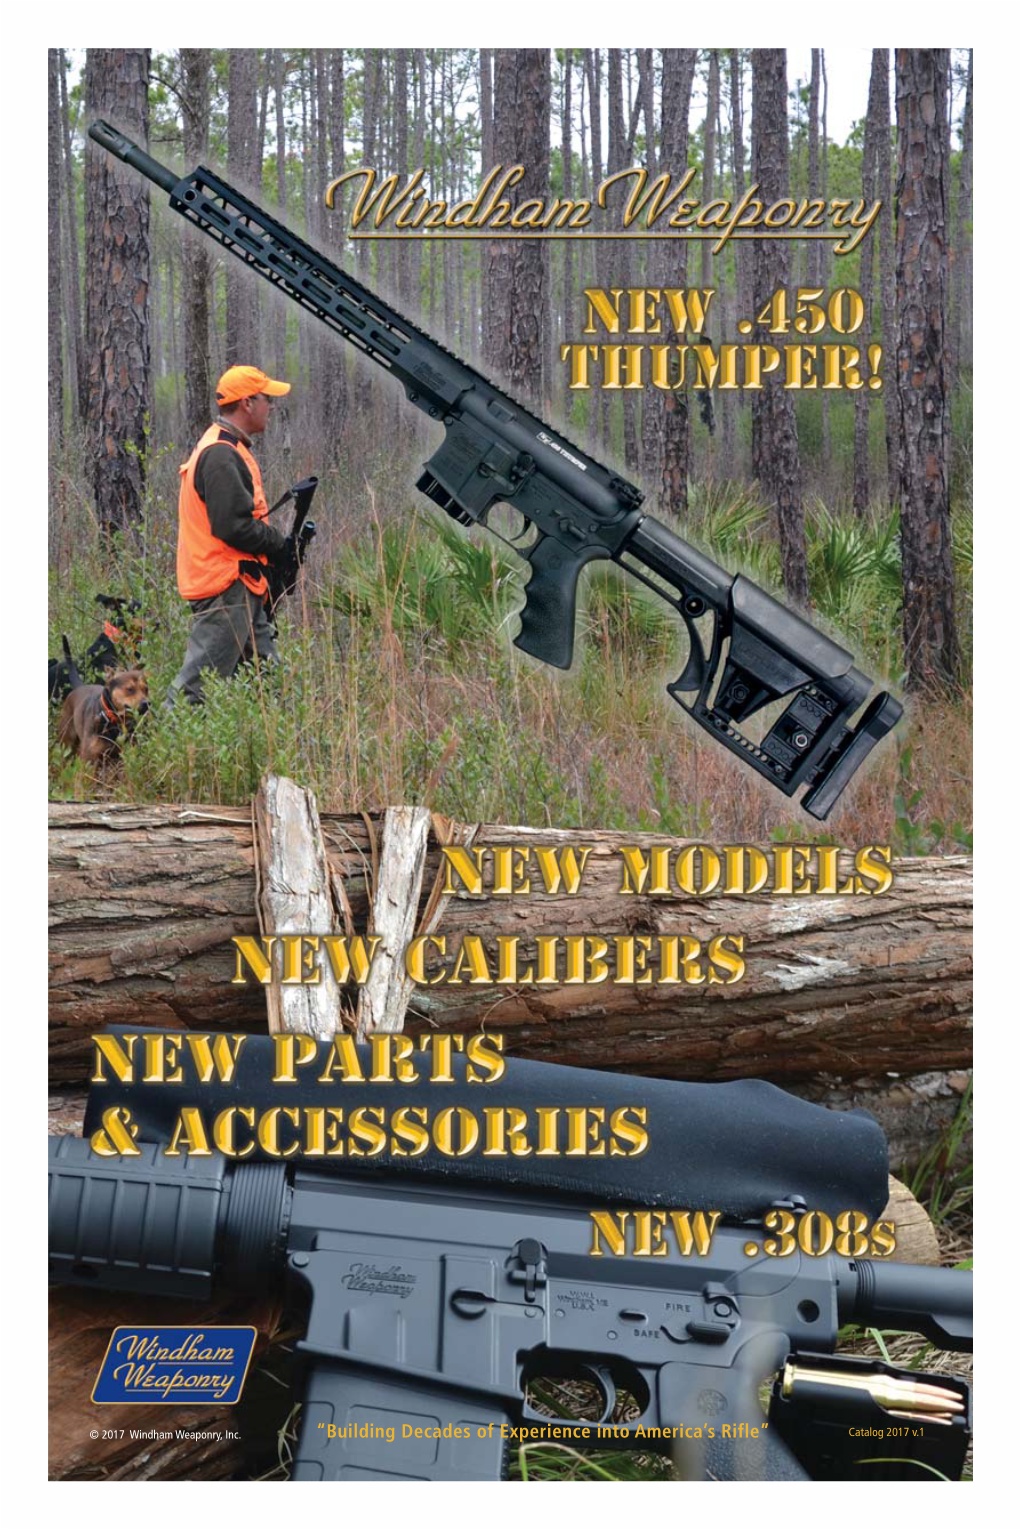 “Building Decades of Experience Into America's Rifle”